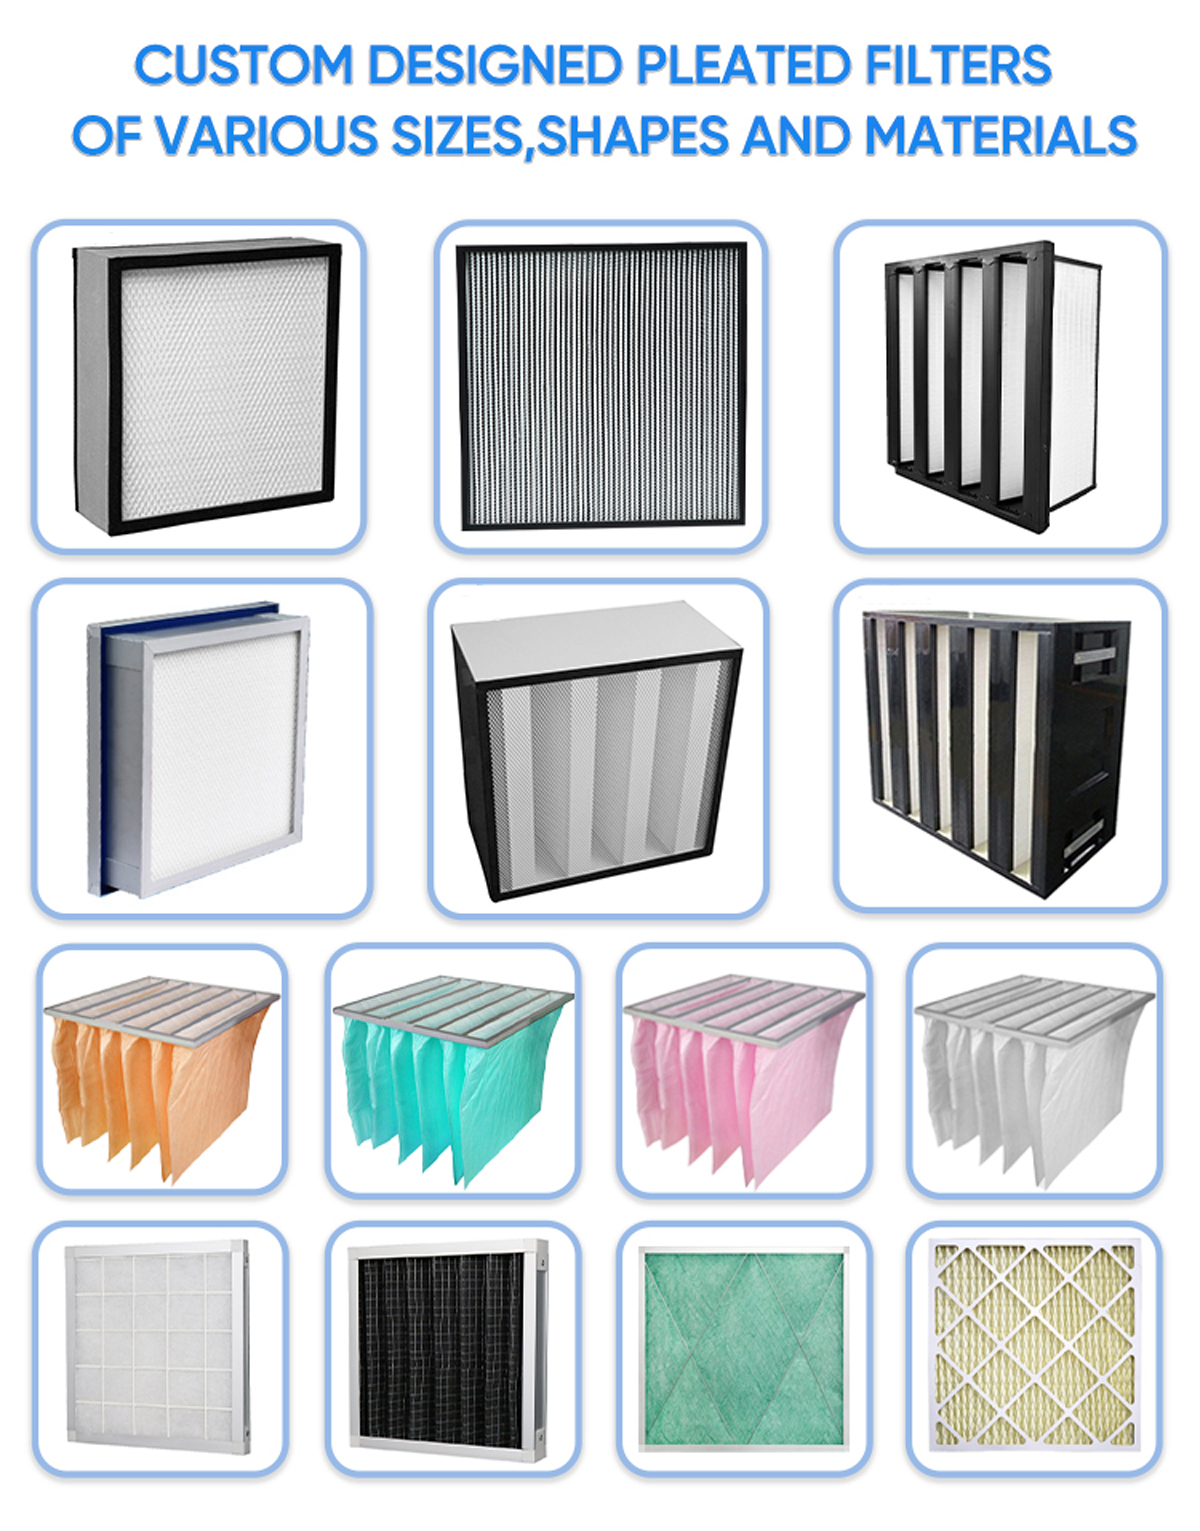 Dust Filter Material